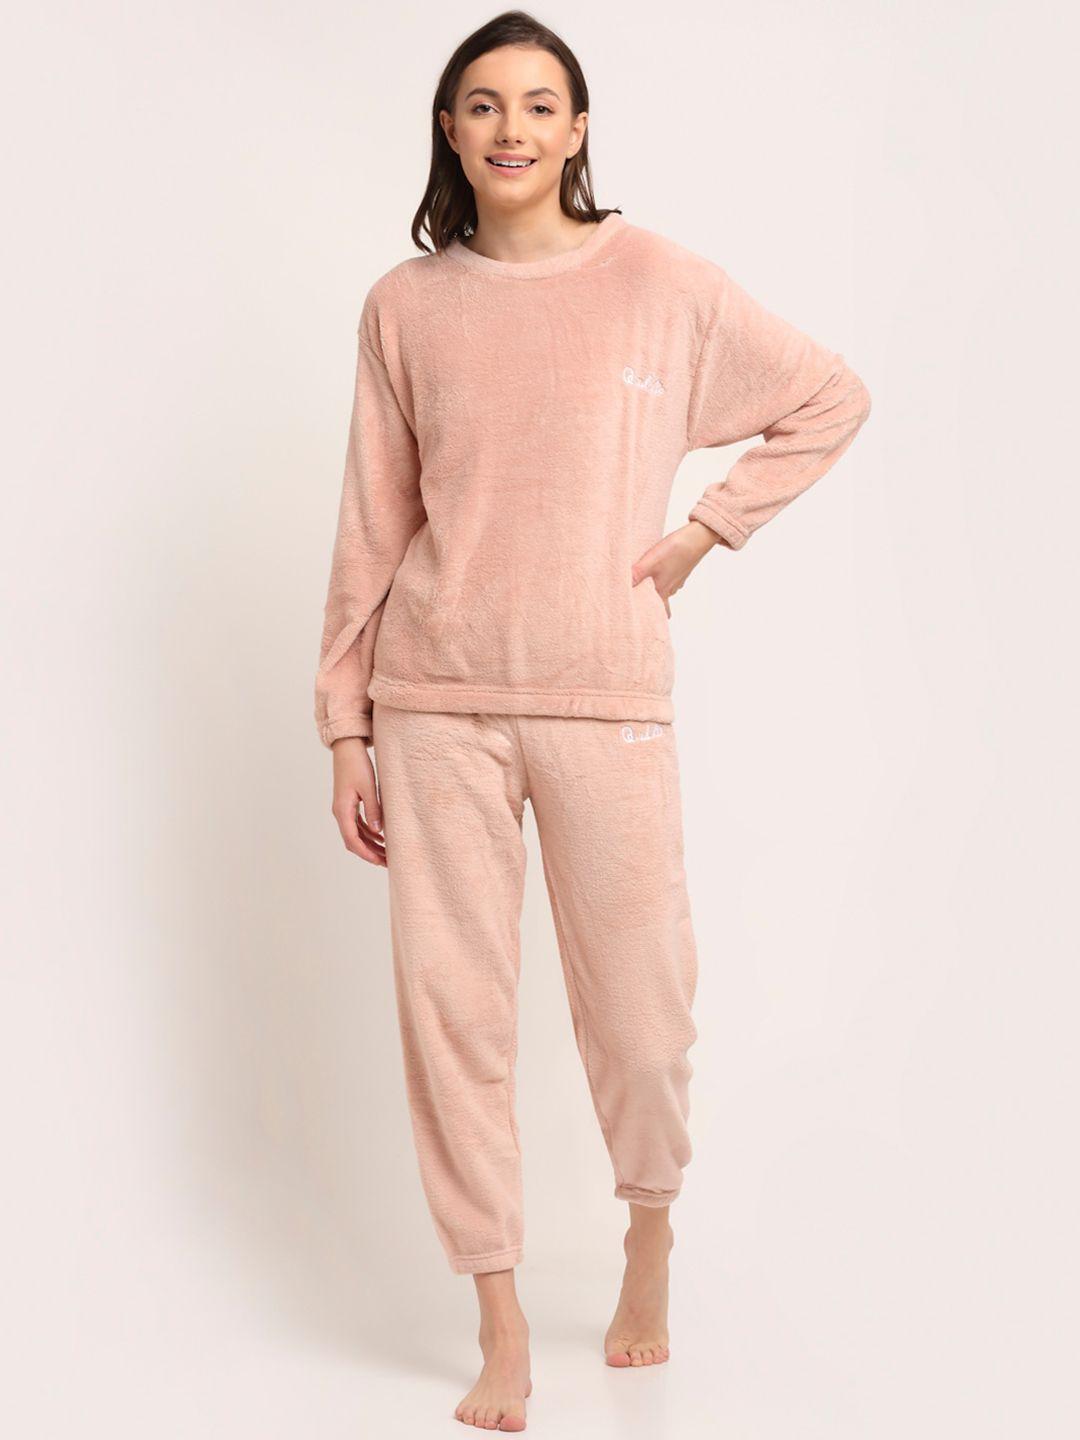 tag 7 women peach-coloured solid night suit